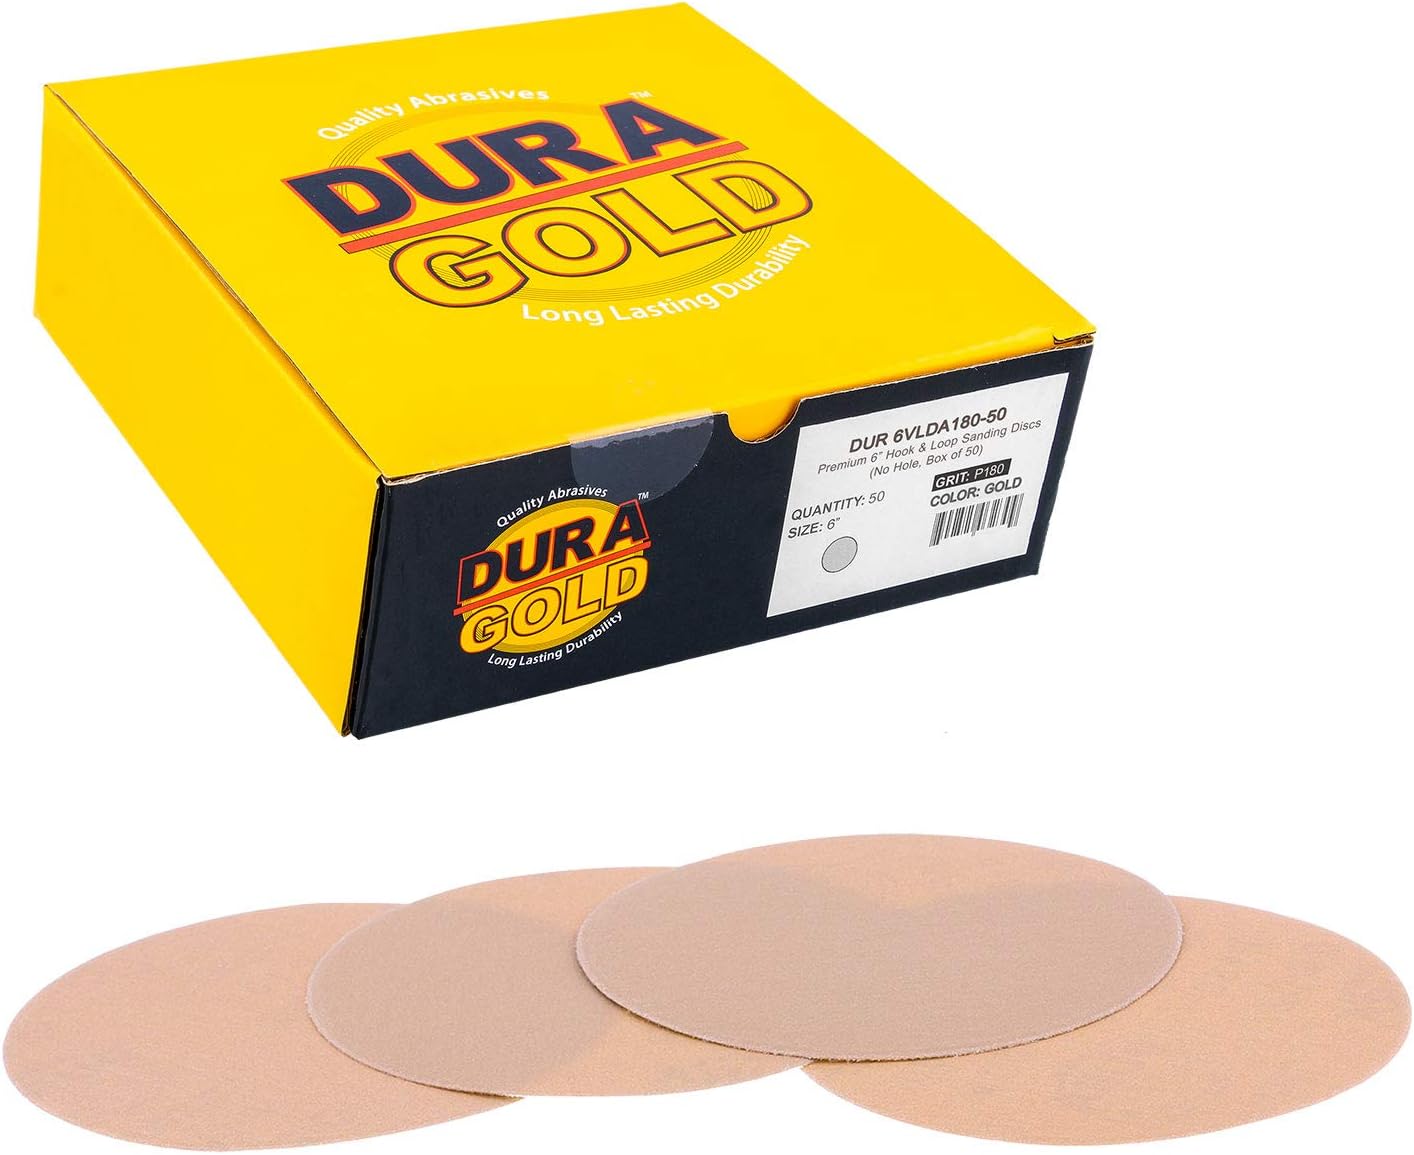 SANDING DISC 6" 50 Pieces Auto Body 3000 grit Hook and Loop Disc 